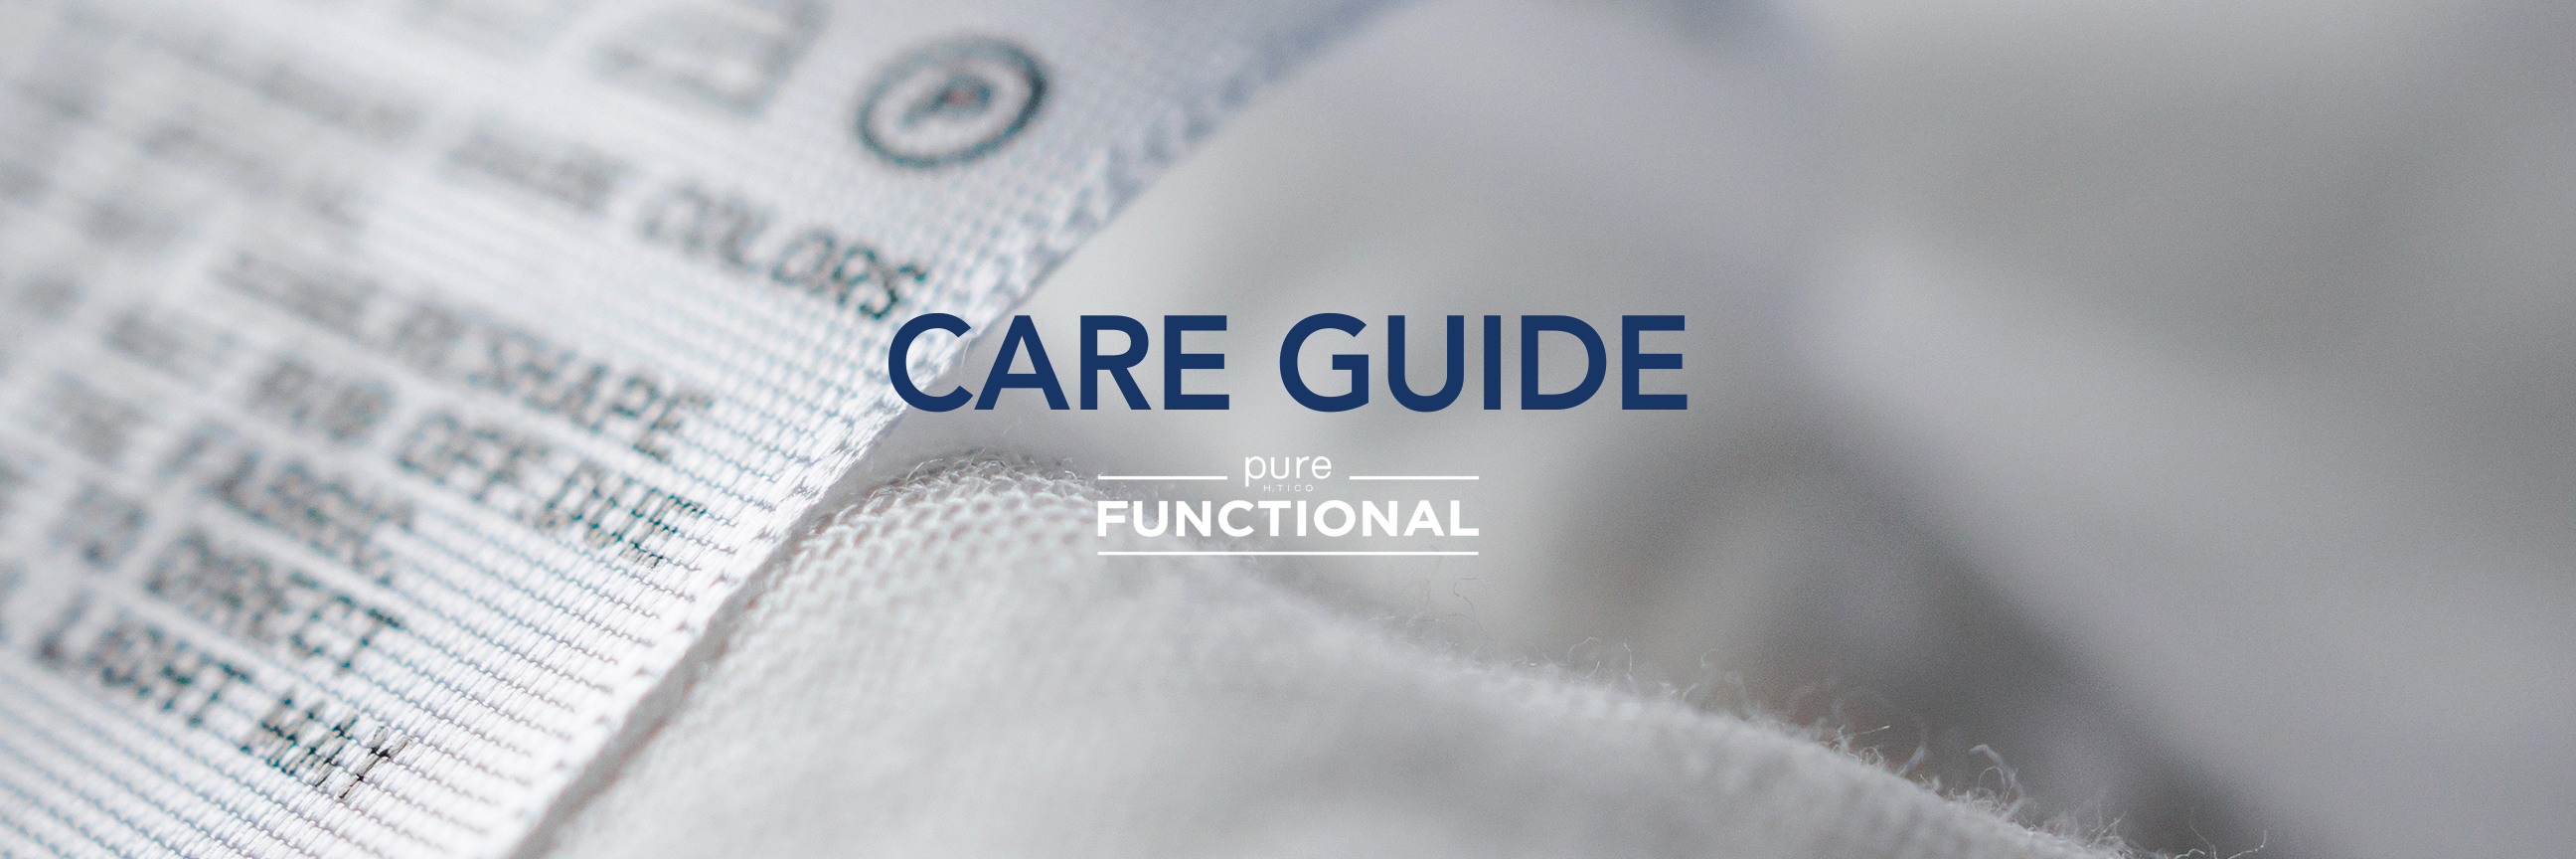 FUNCTIONAL CARE GUIDE